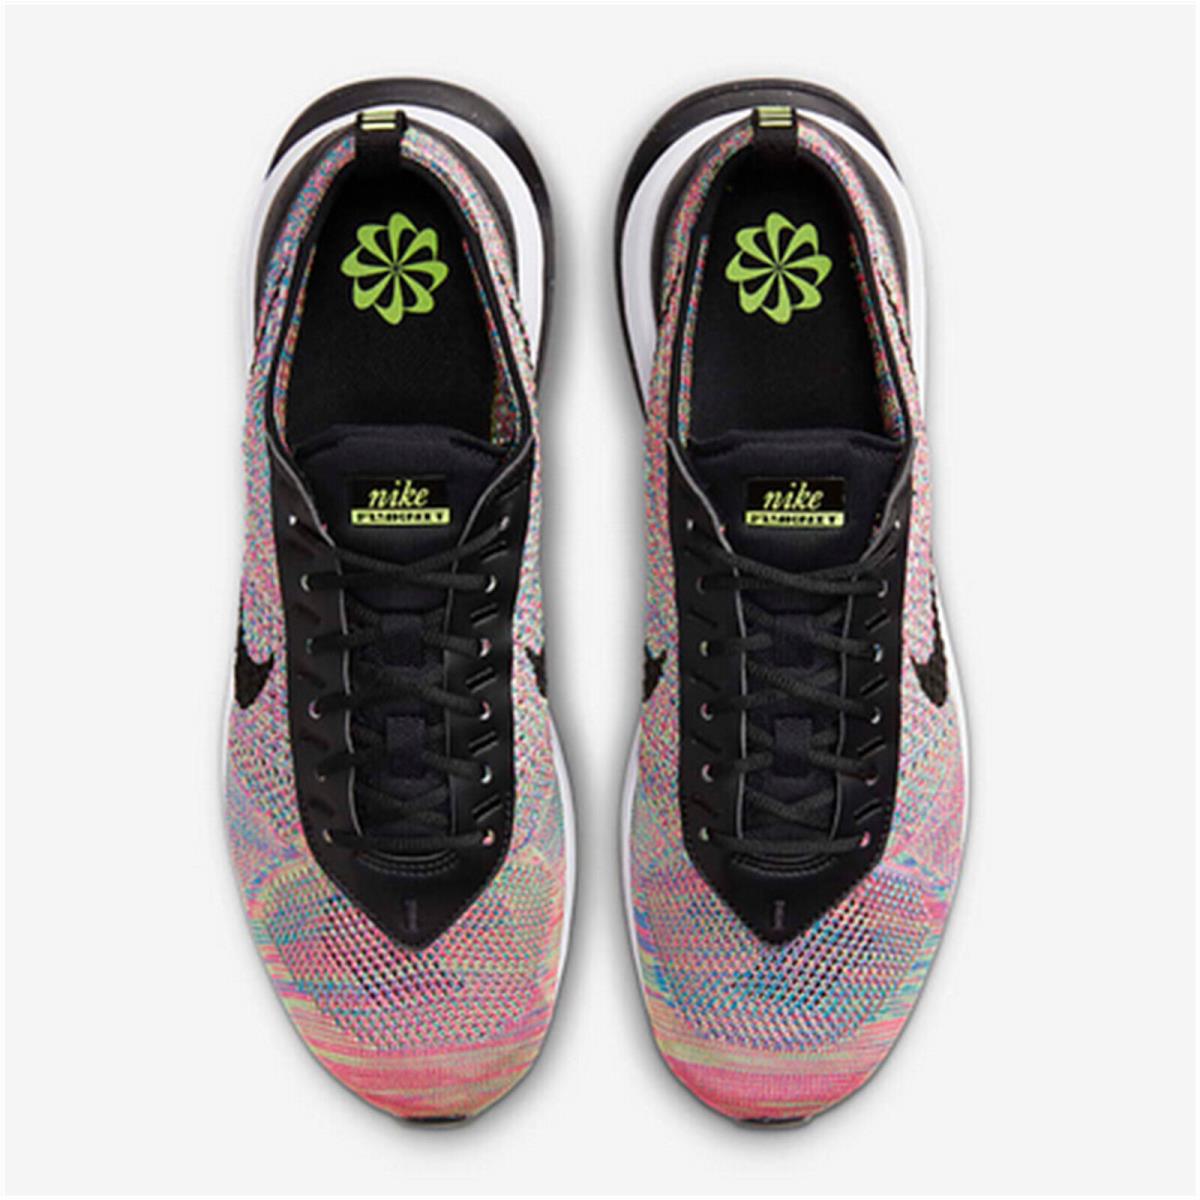 Nike shoes Air Max Flyknit Racer - GHOST GREEN/BLACK-PINK BLAST 2